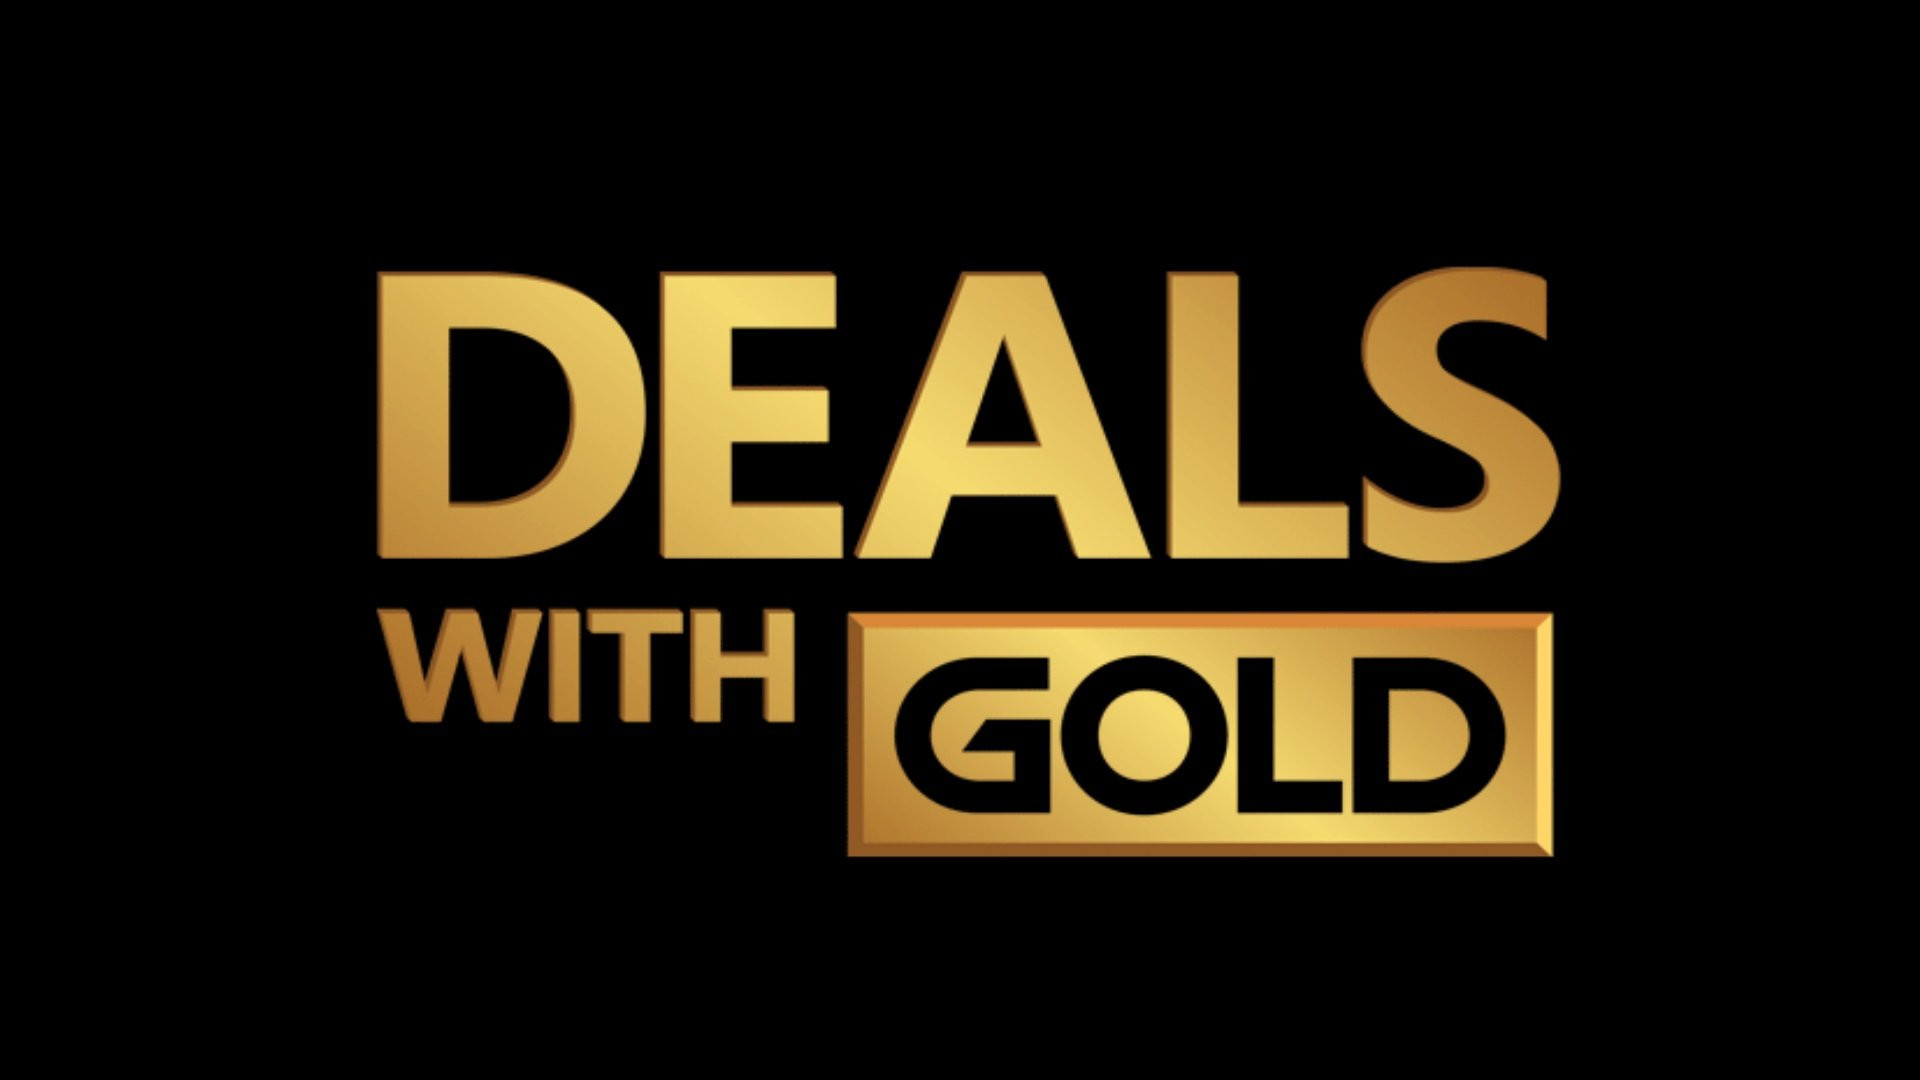 Deals with Gold semaine 36